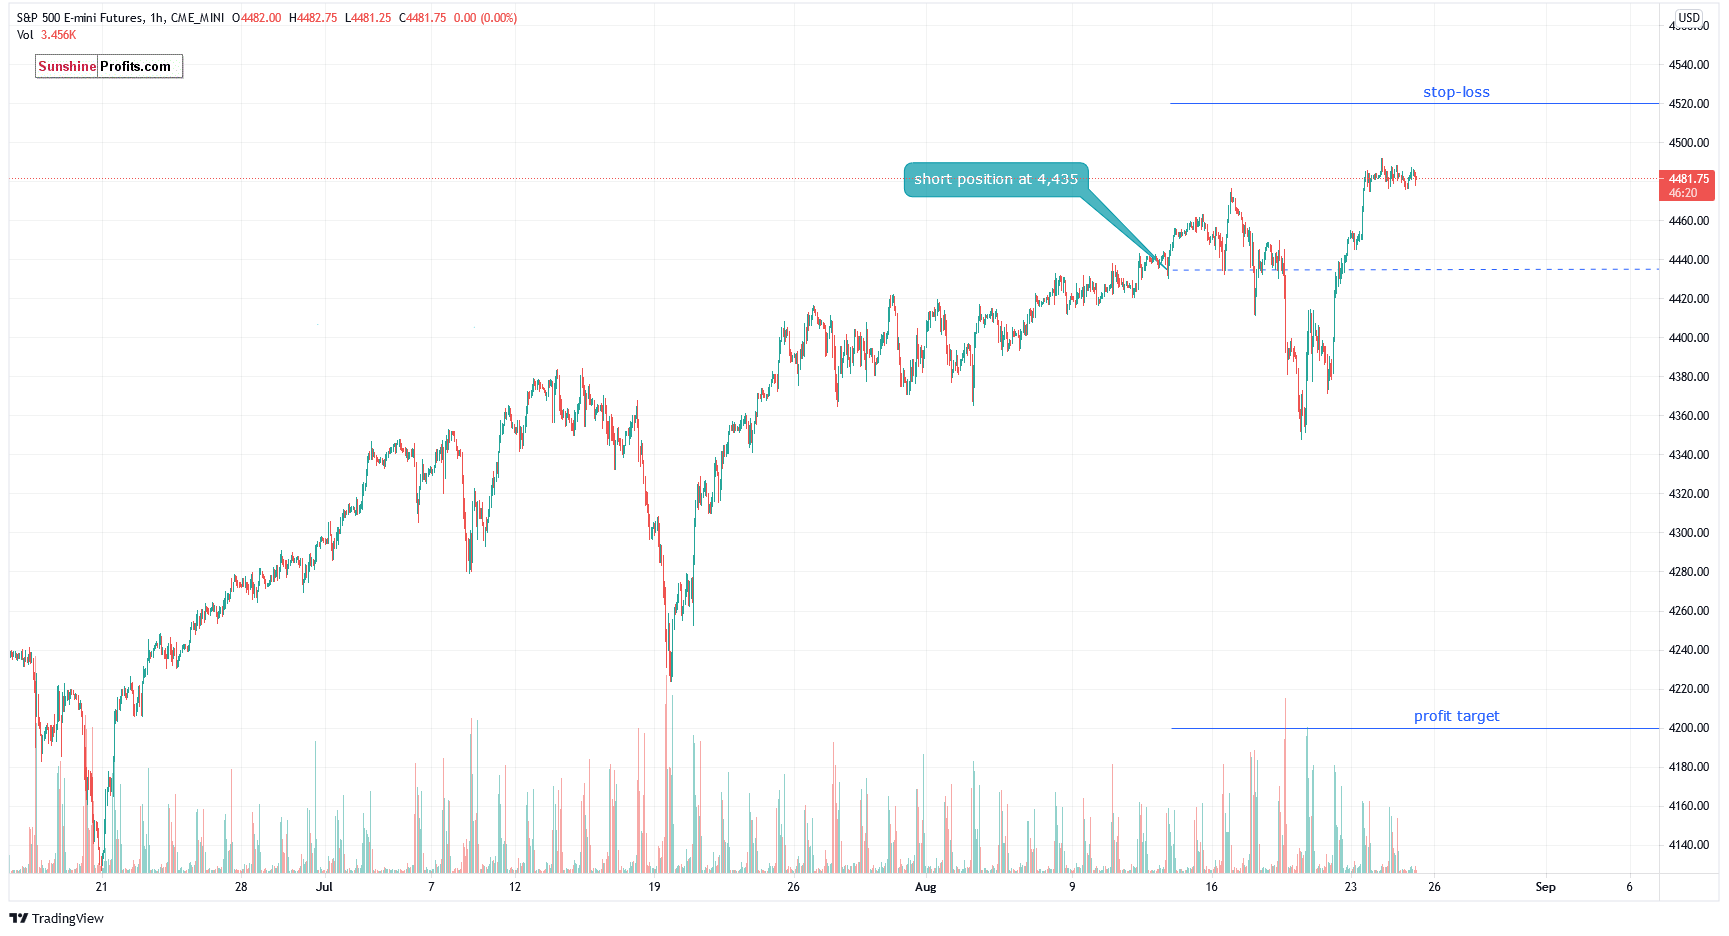 S&P 500 Futures Hourly Chart.